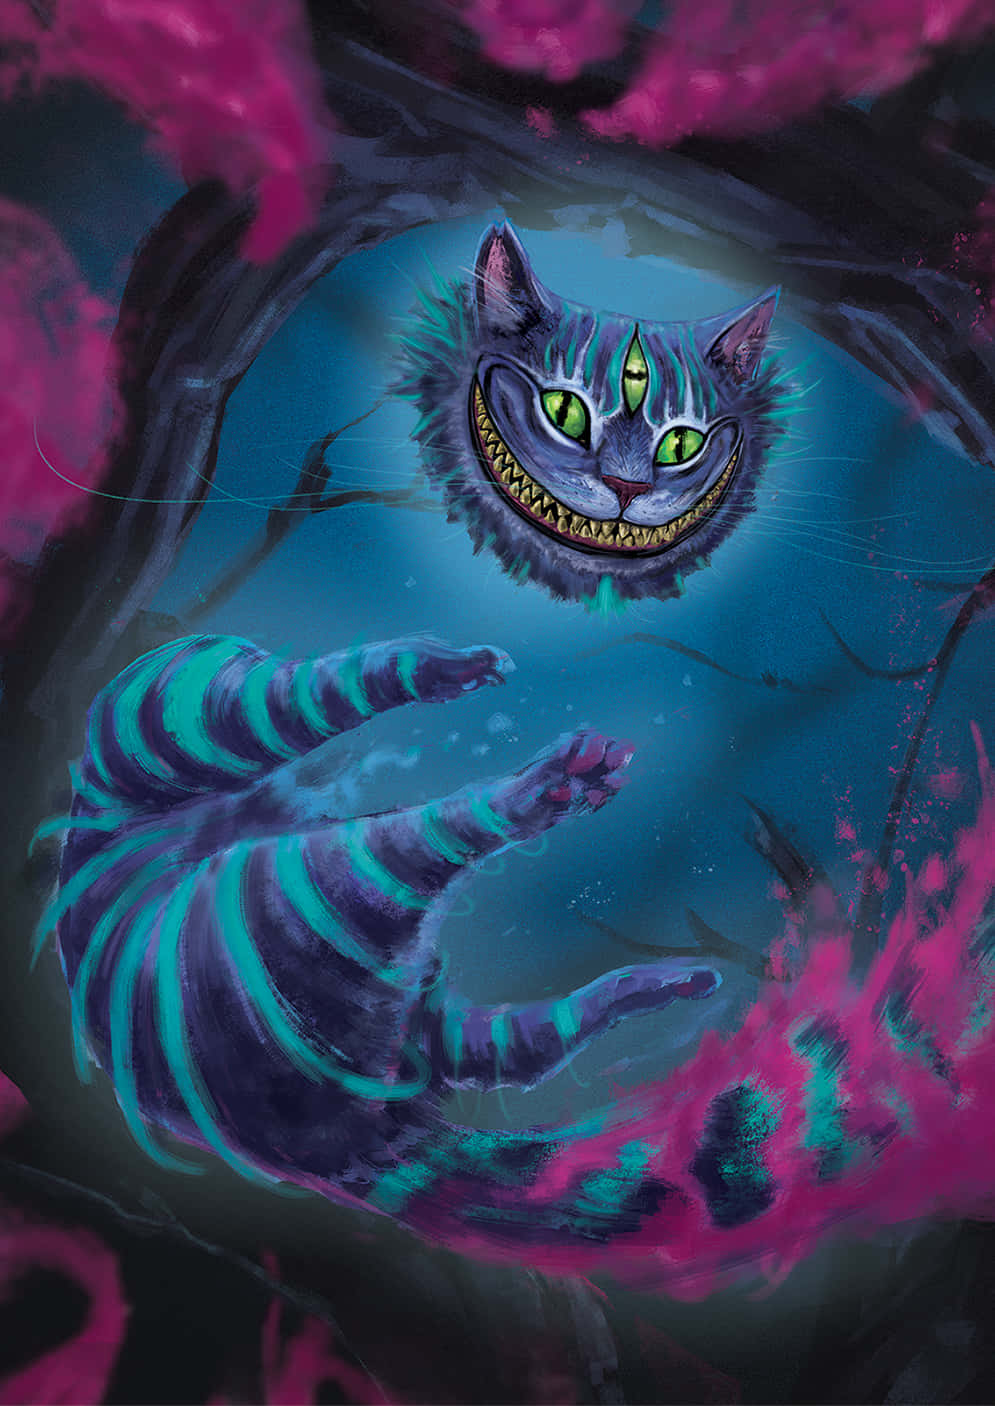 The iconic Cheshire Cat, with its mischievous grin, is a classic character from the Alice in Wonderland stories.